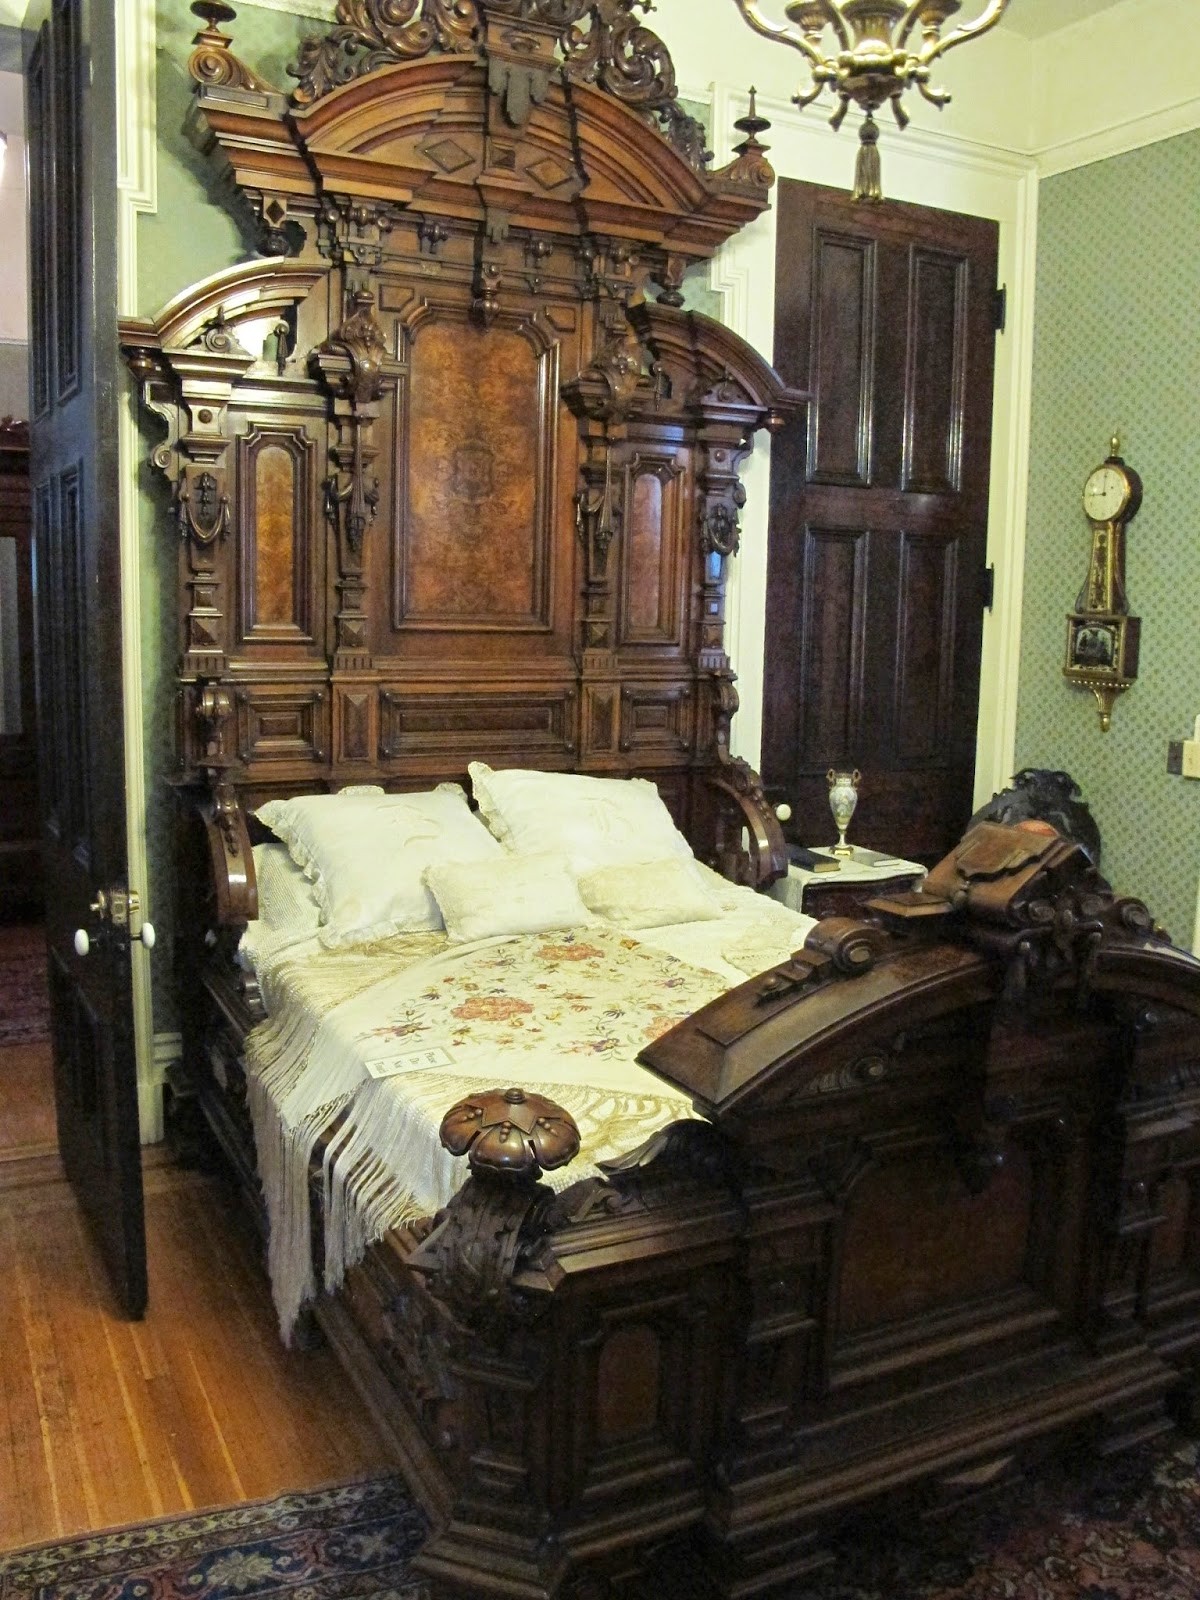 Bed from bedroom set manufactured in louisville kentucky by the